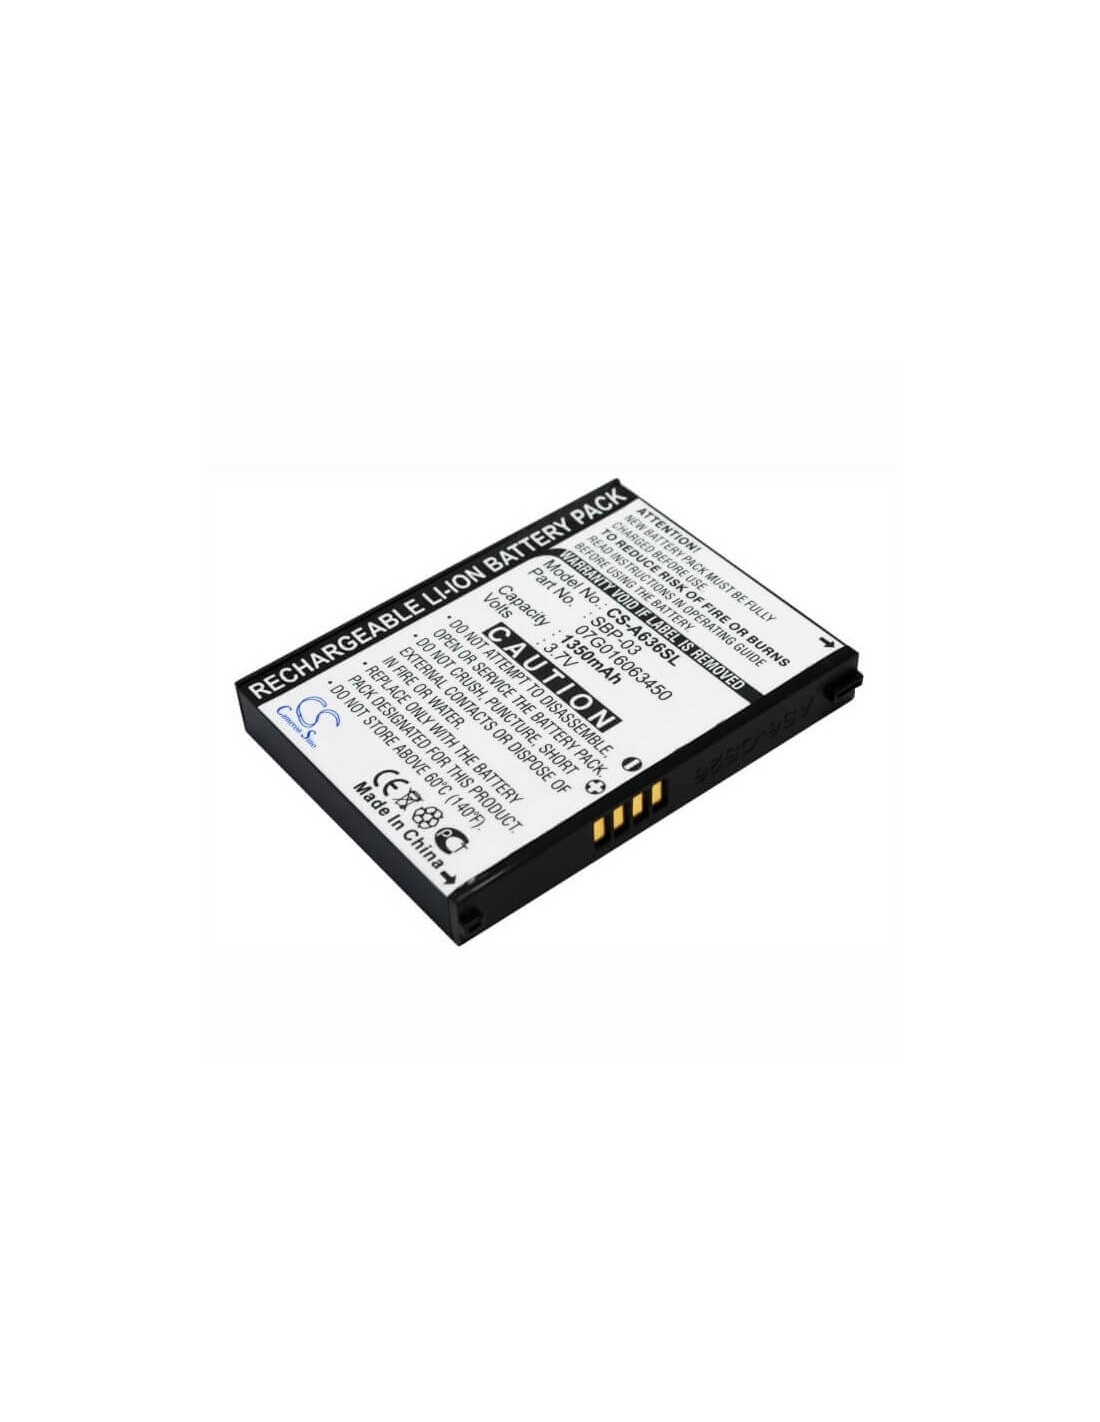 Battery for Asus, Mypal A630, Mypal A632, Mypal A632n 3.7V, 1350mAh - 5.00Wh